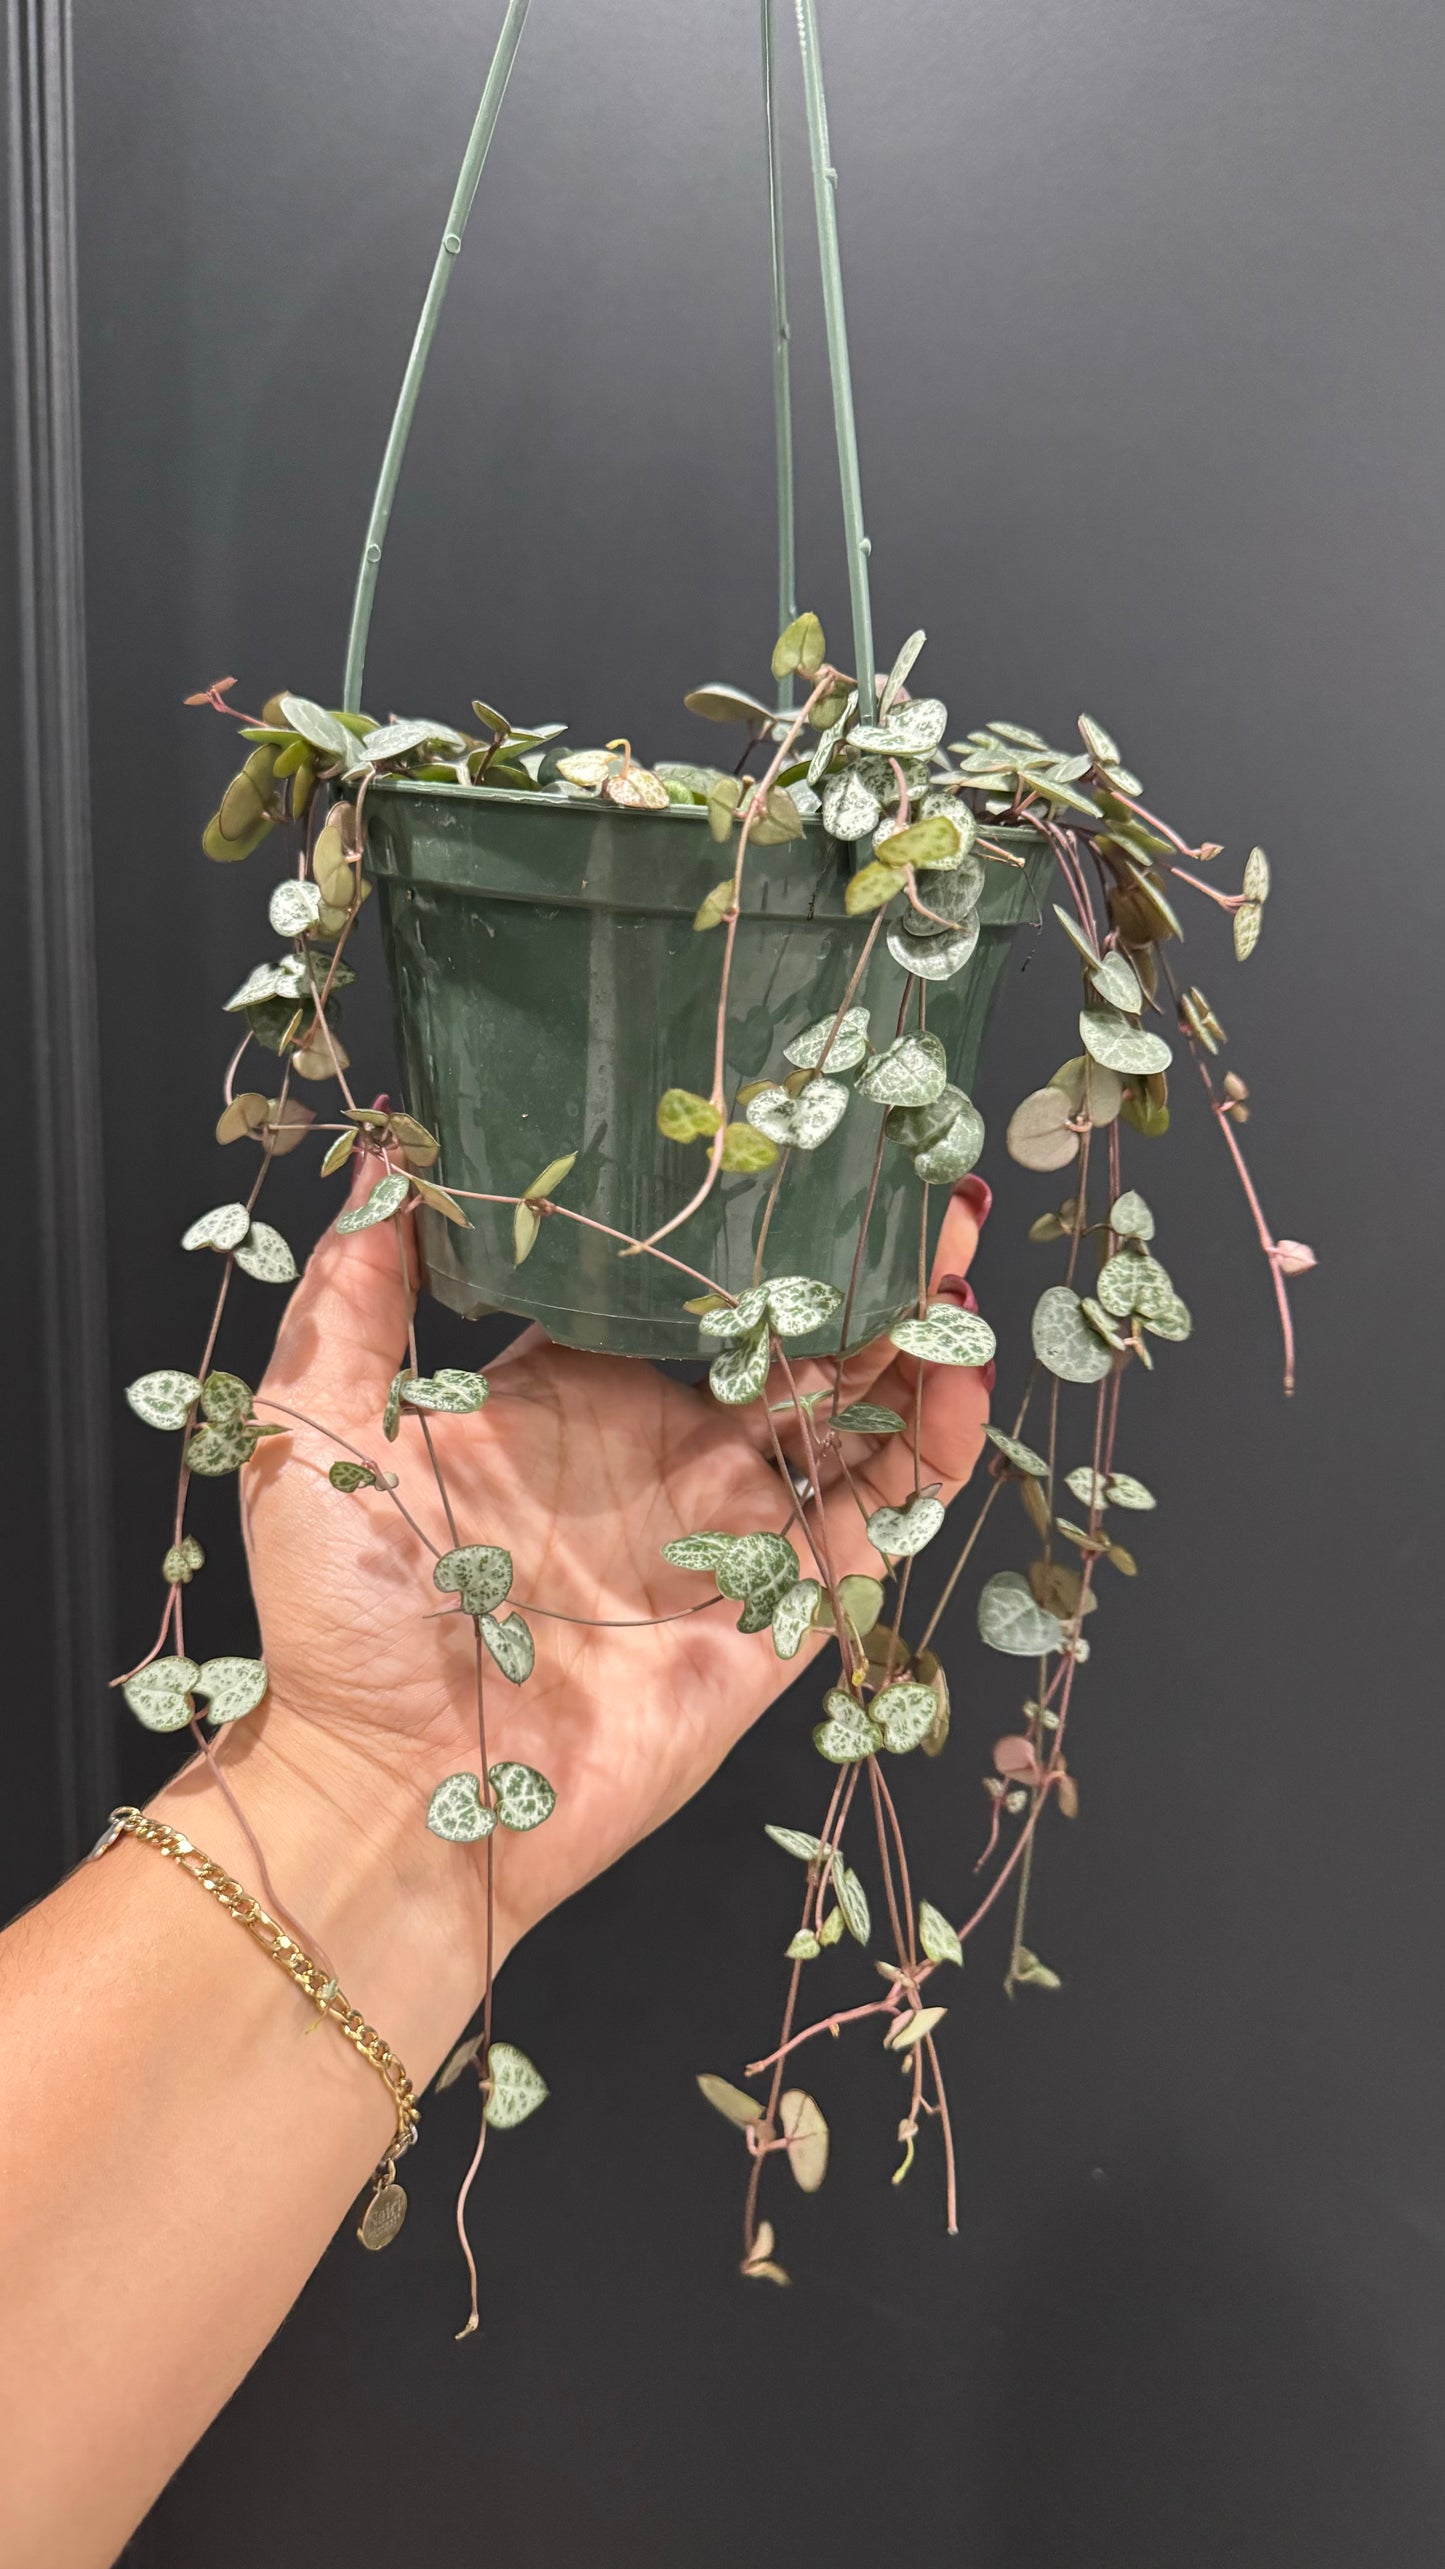 String of Hearts | Ceropegia Woodii | Chain of Hearts